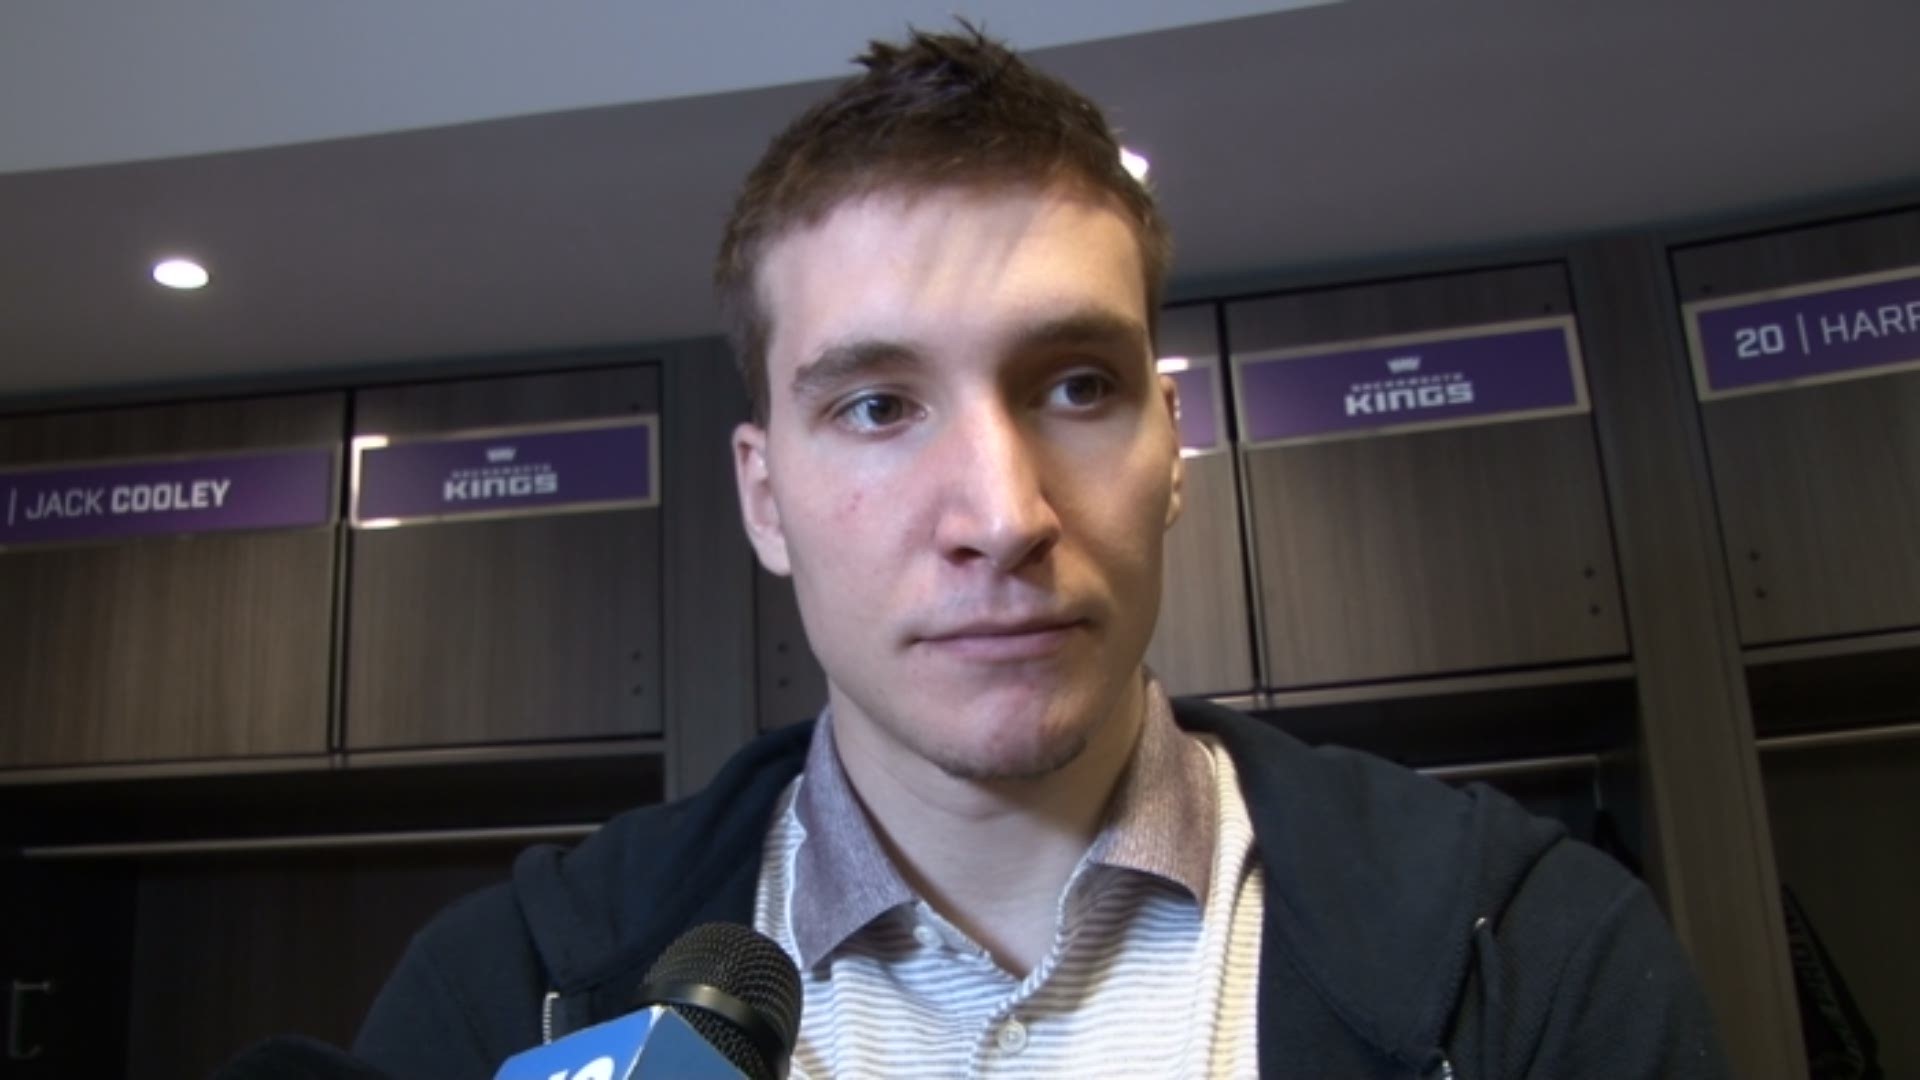 Kings rookie guard Bogdan Bogdanovic talks about Thursday's home loss to the Indiana Pacers, the level of fight his team showed being better than Tuesday's loss to the Mavericks, and wanting to become more of a vocal presence with his teammates.